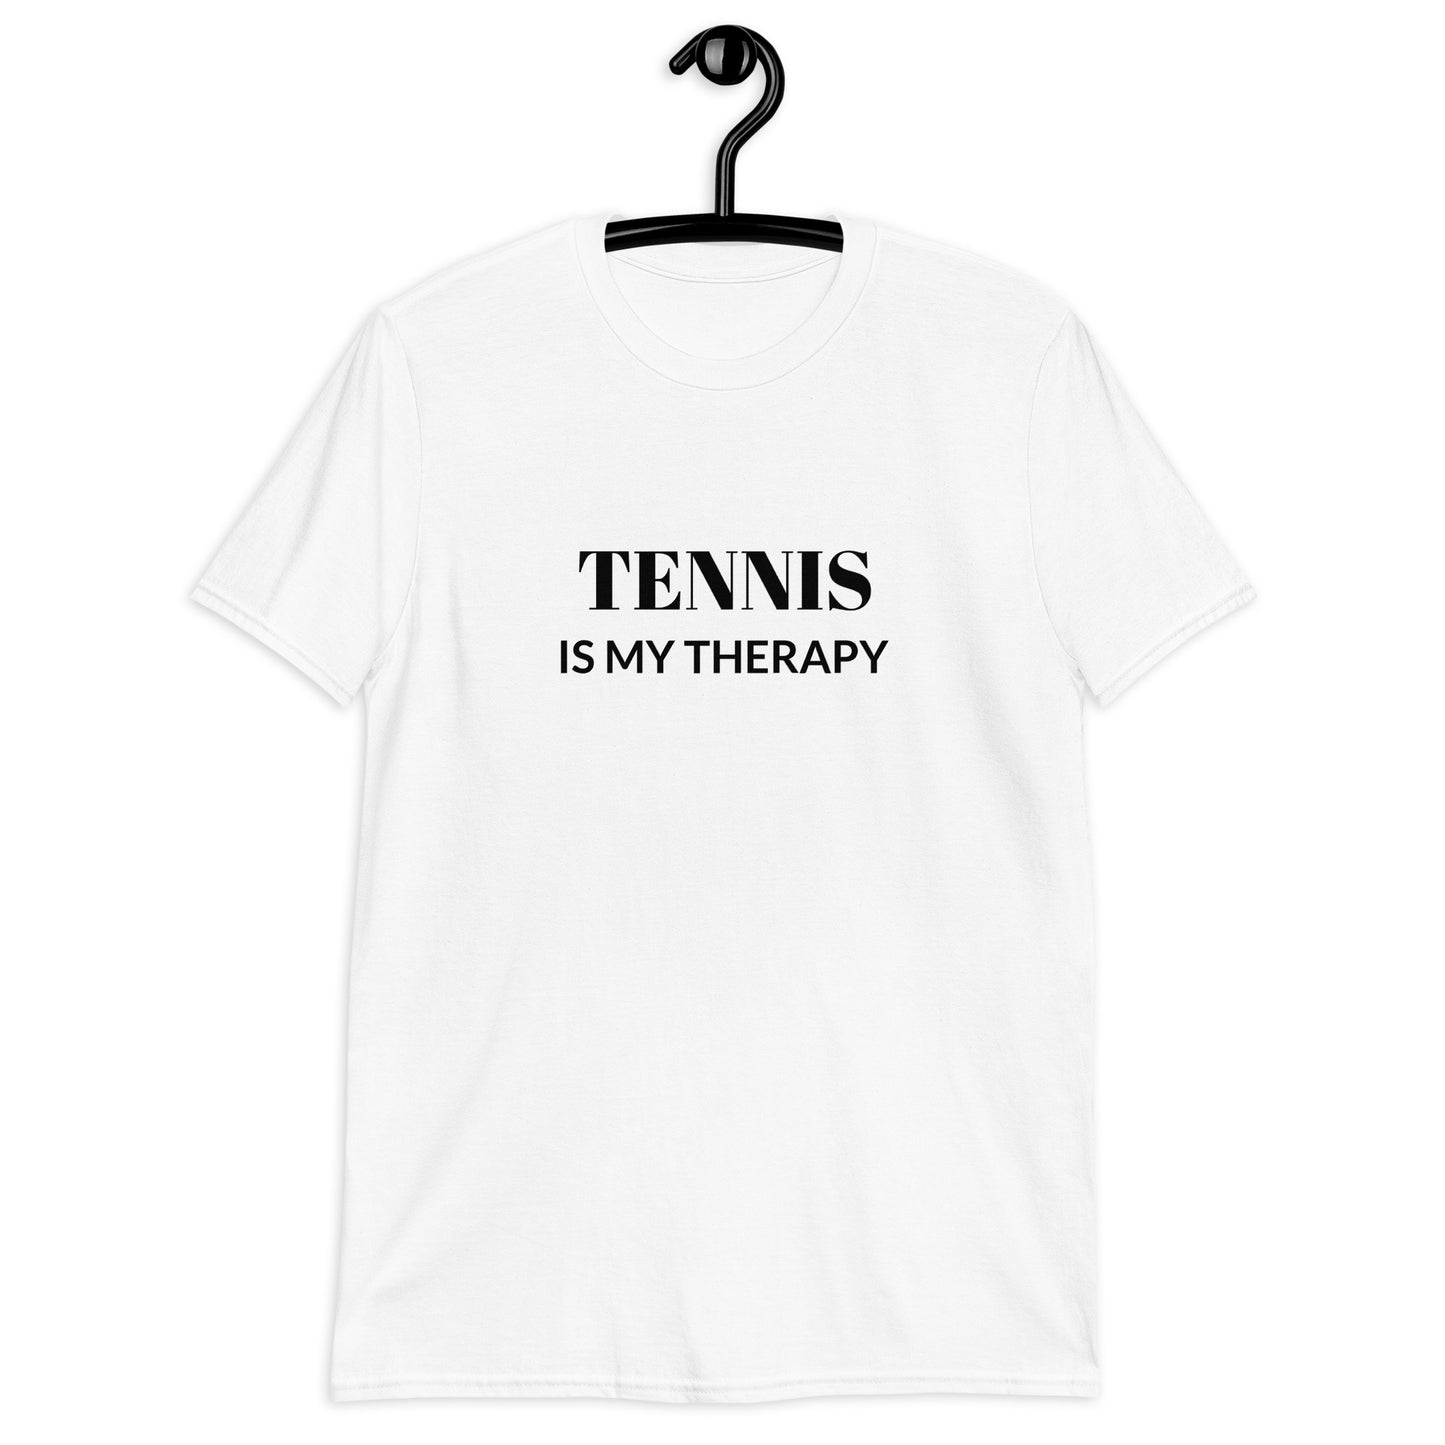 'Tennis is My Therapy' Short-Sleeve Unisex T-Shirt